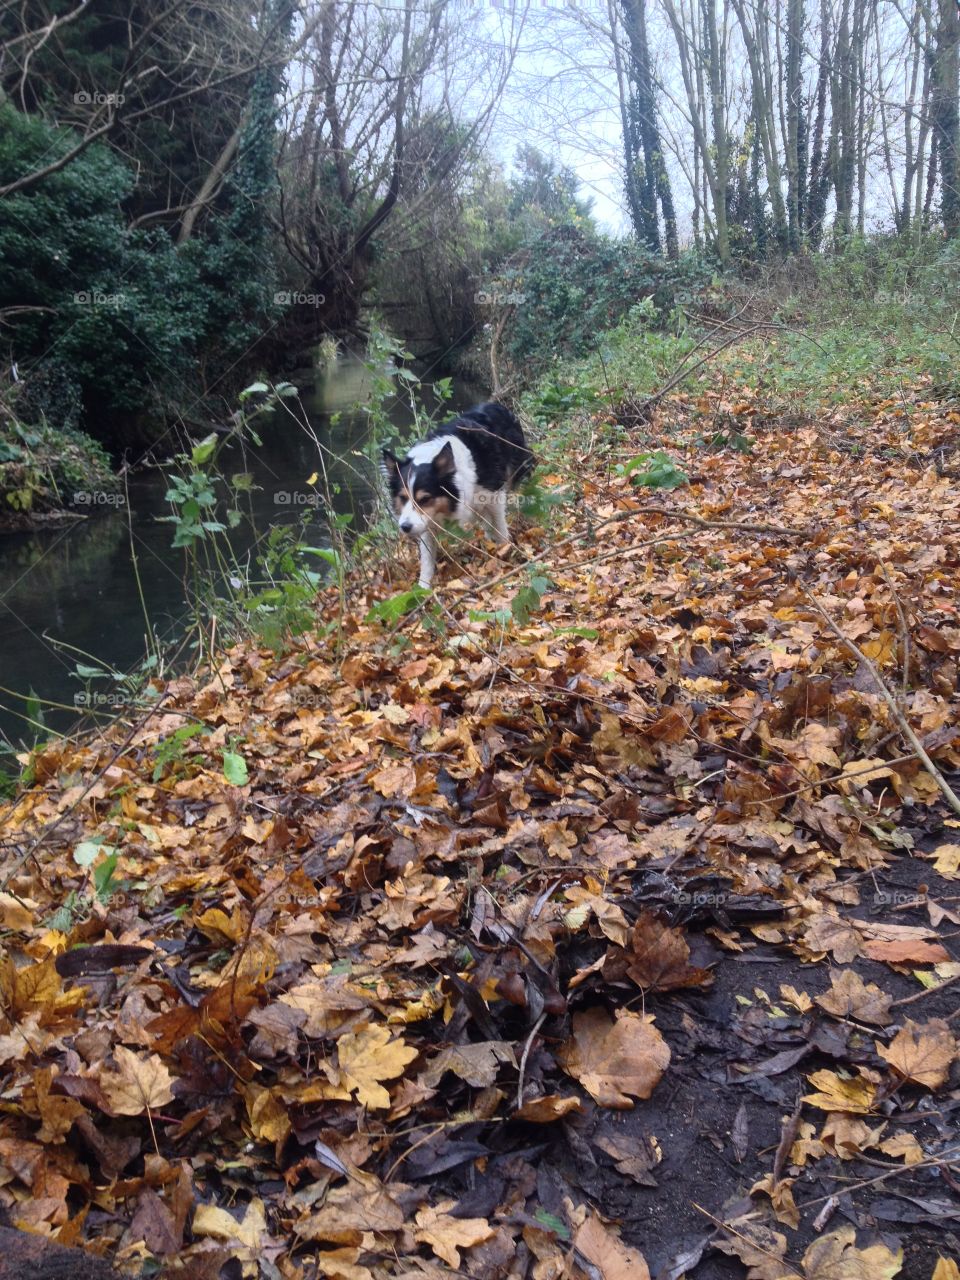 Running through the leaves so she can go in the stream, naughty ;)
